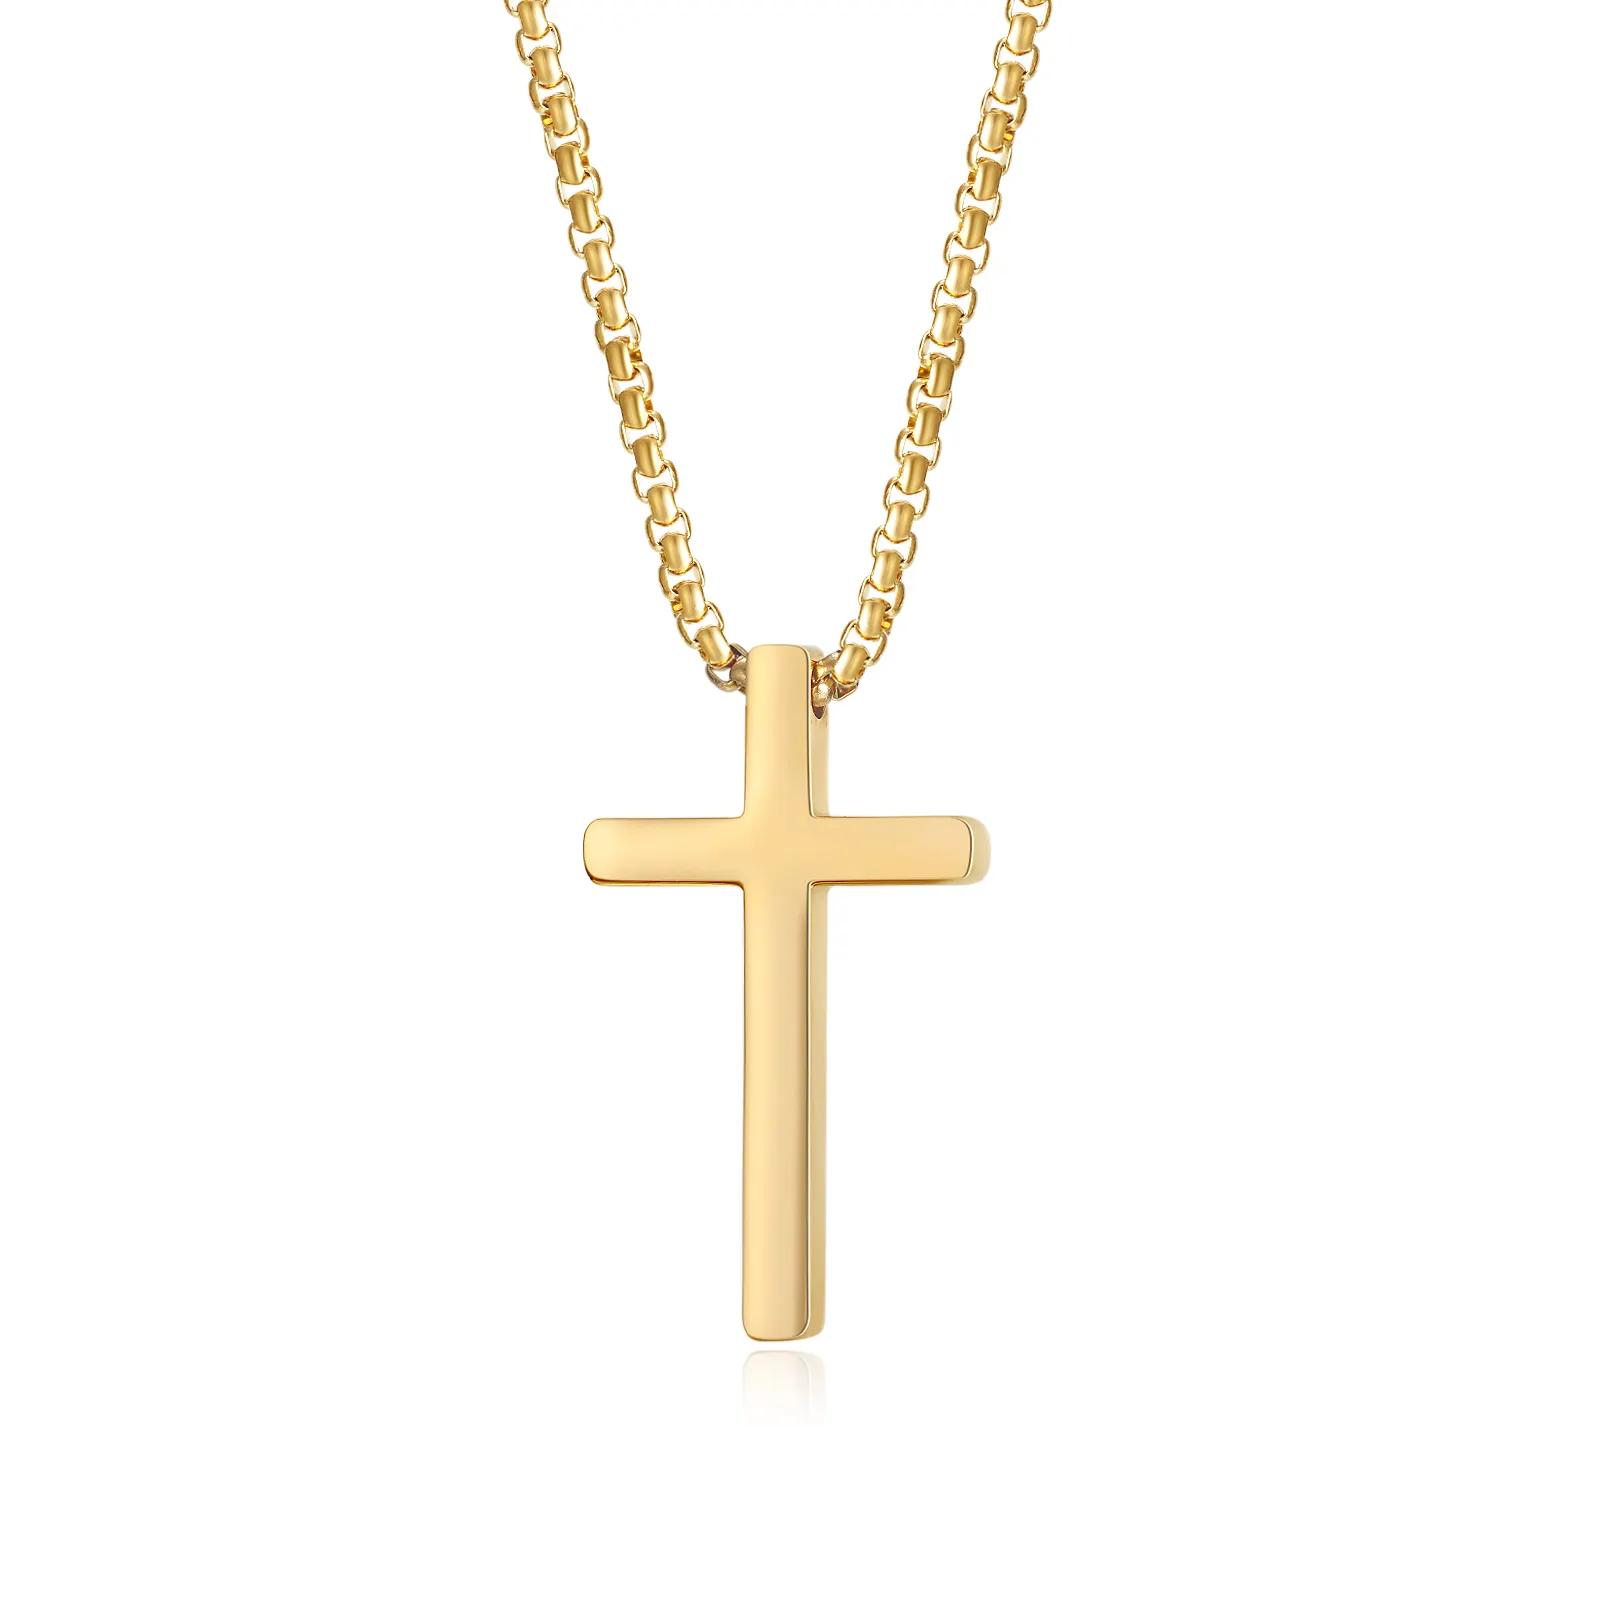 Hot 18K gold plated Fashion Jewelry Wholesale Classic Charm Cross Stainless Steel Pendant Men's Necklaces